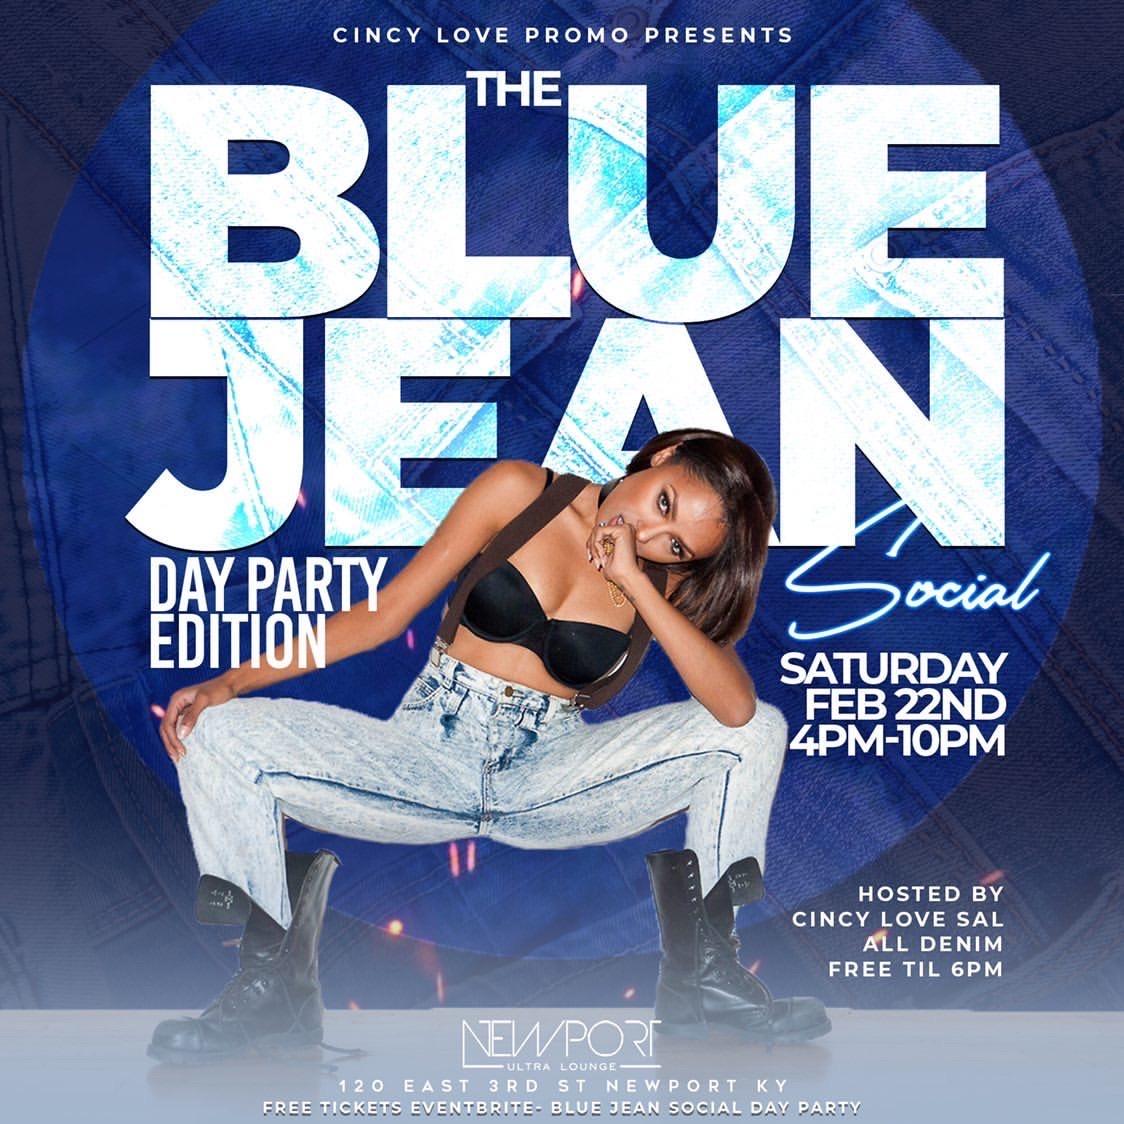 The Blue Jean Social Day Party Edition